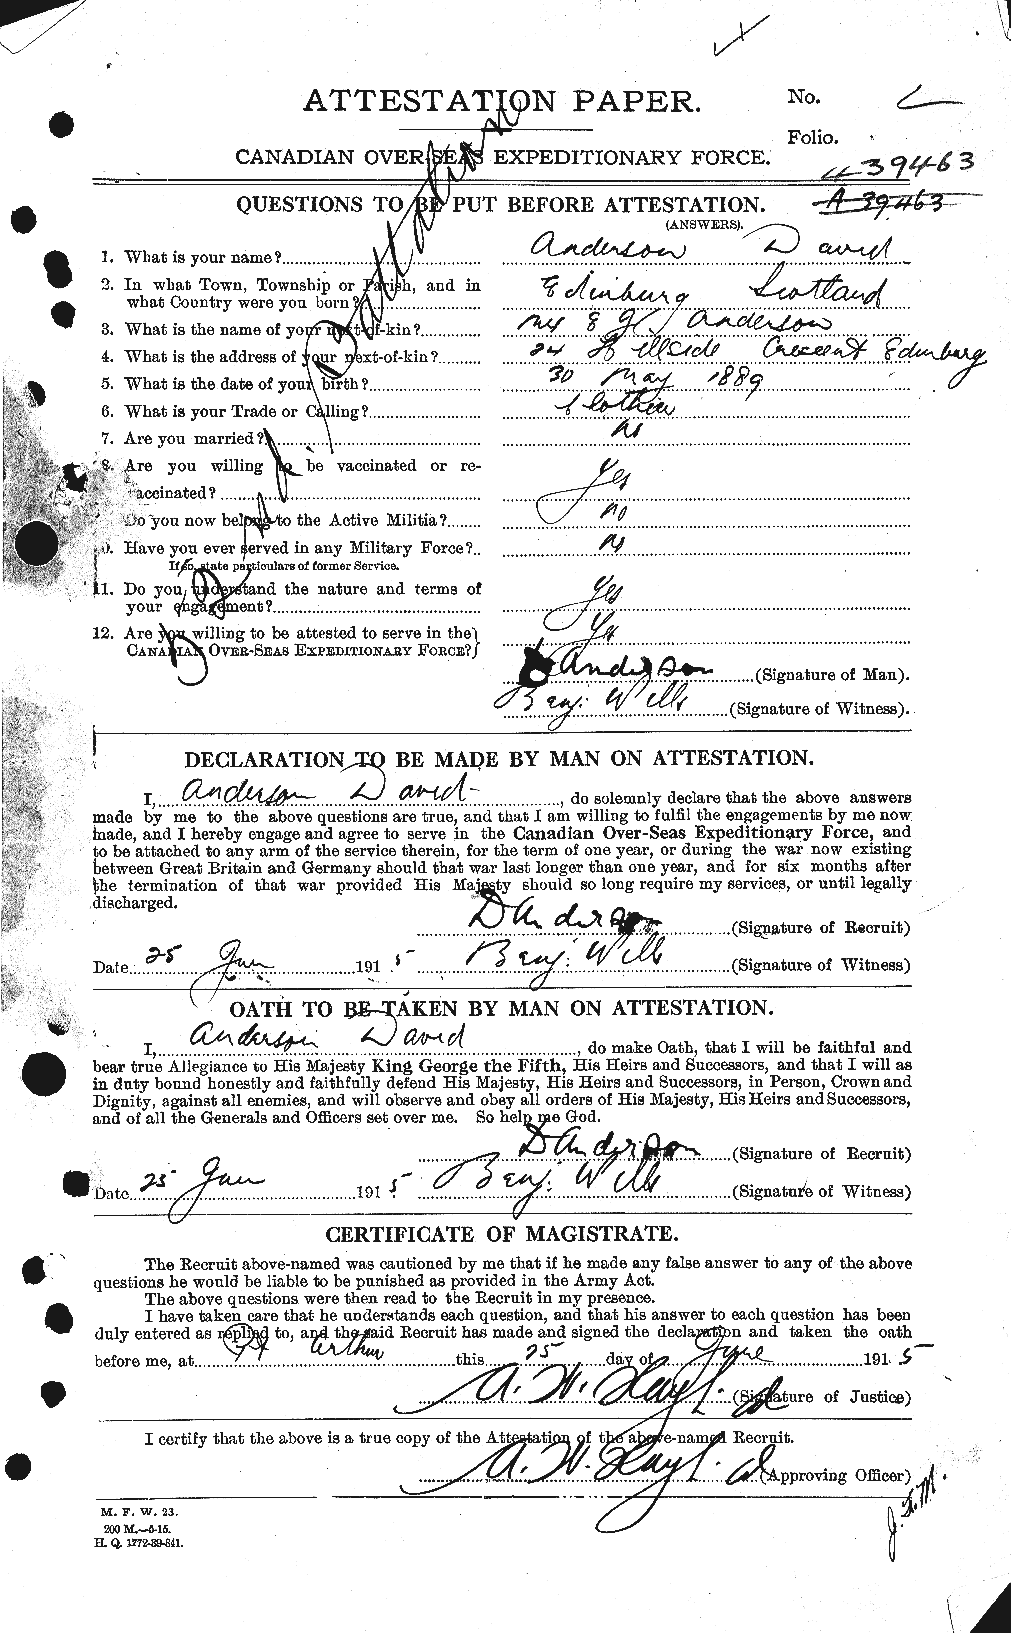 Personnel Records of the First World War - CEF 210028a